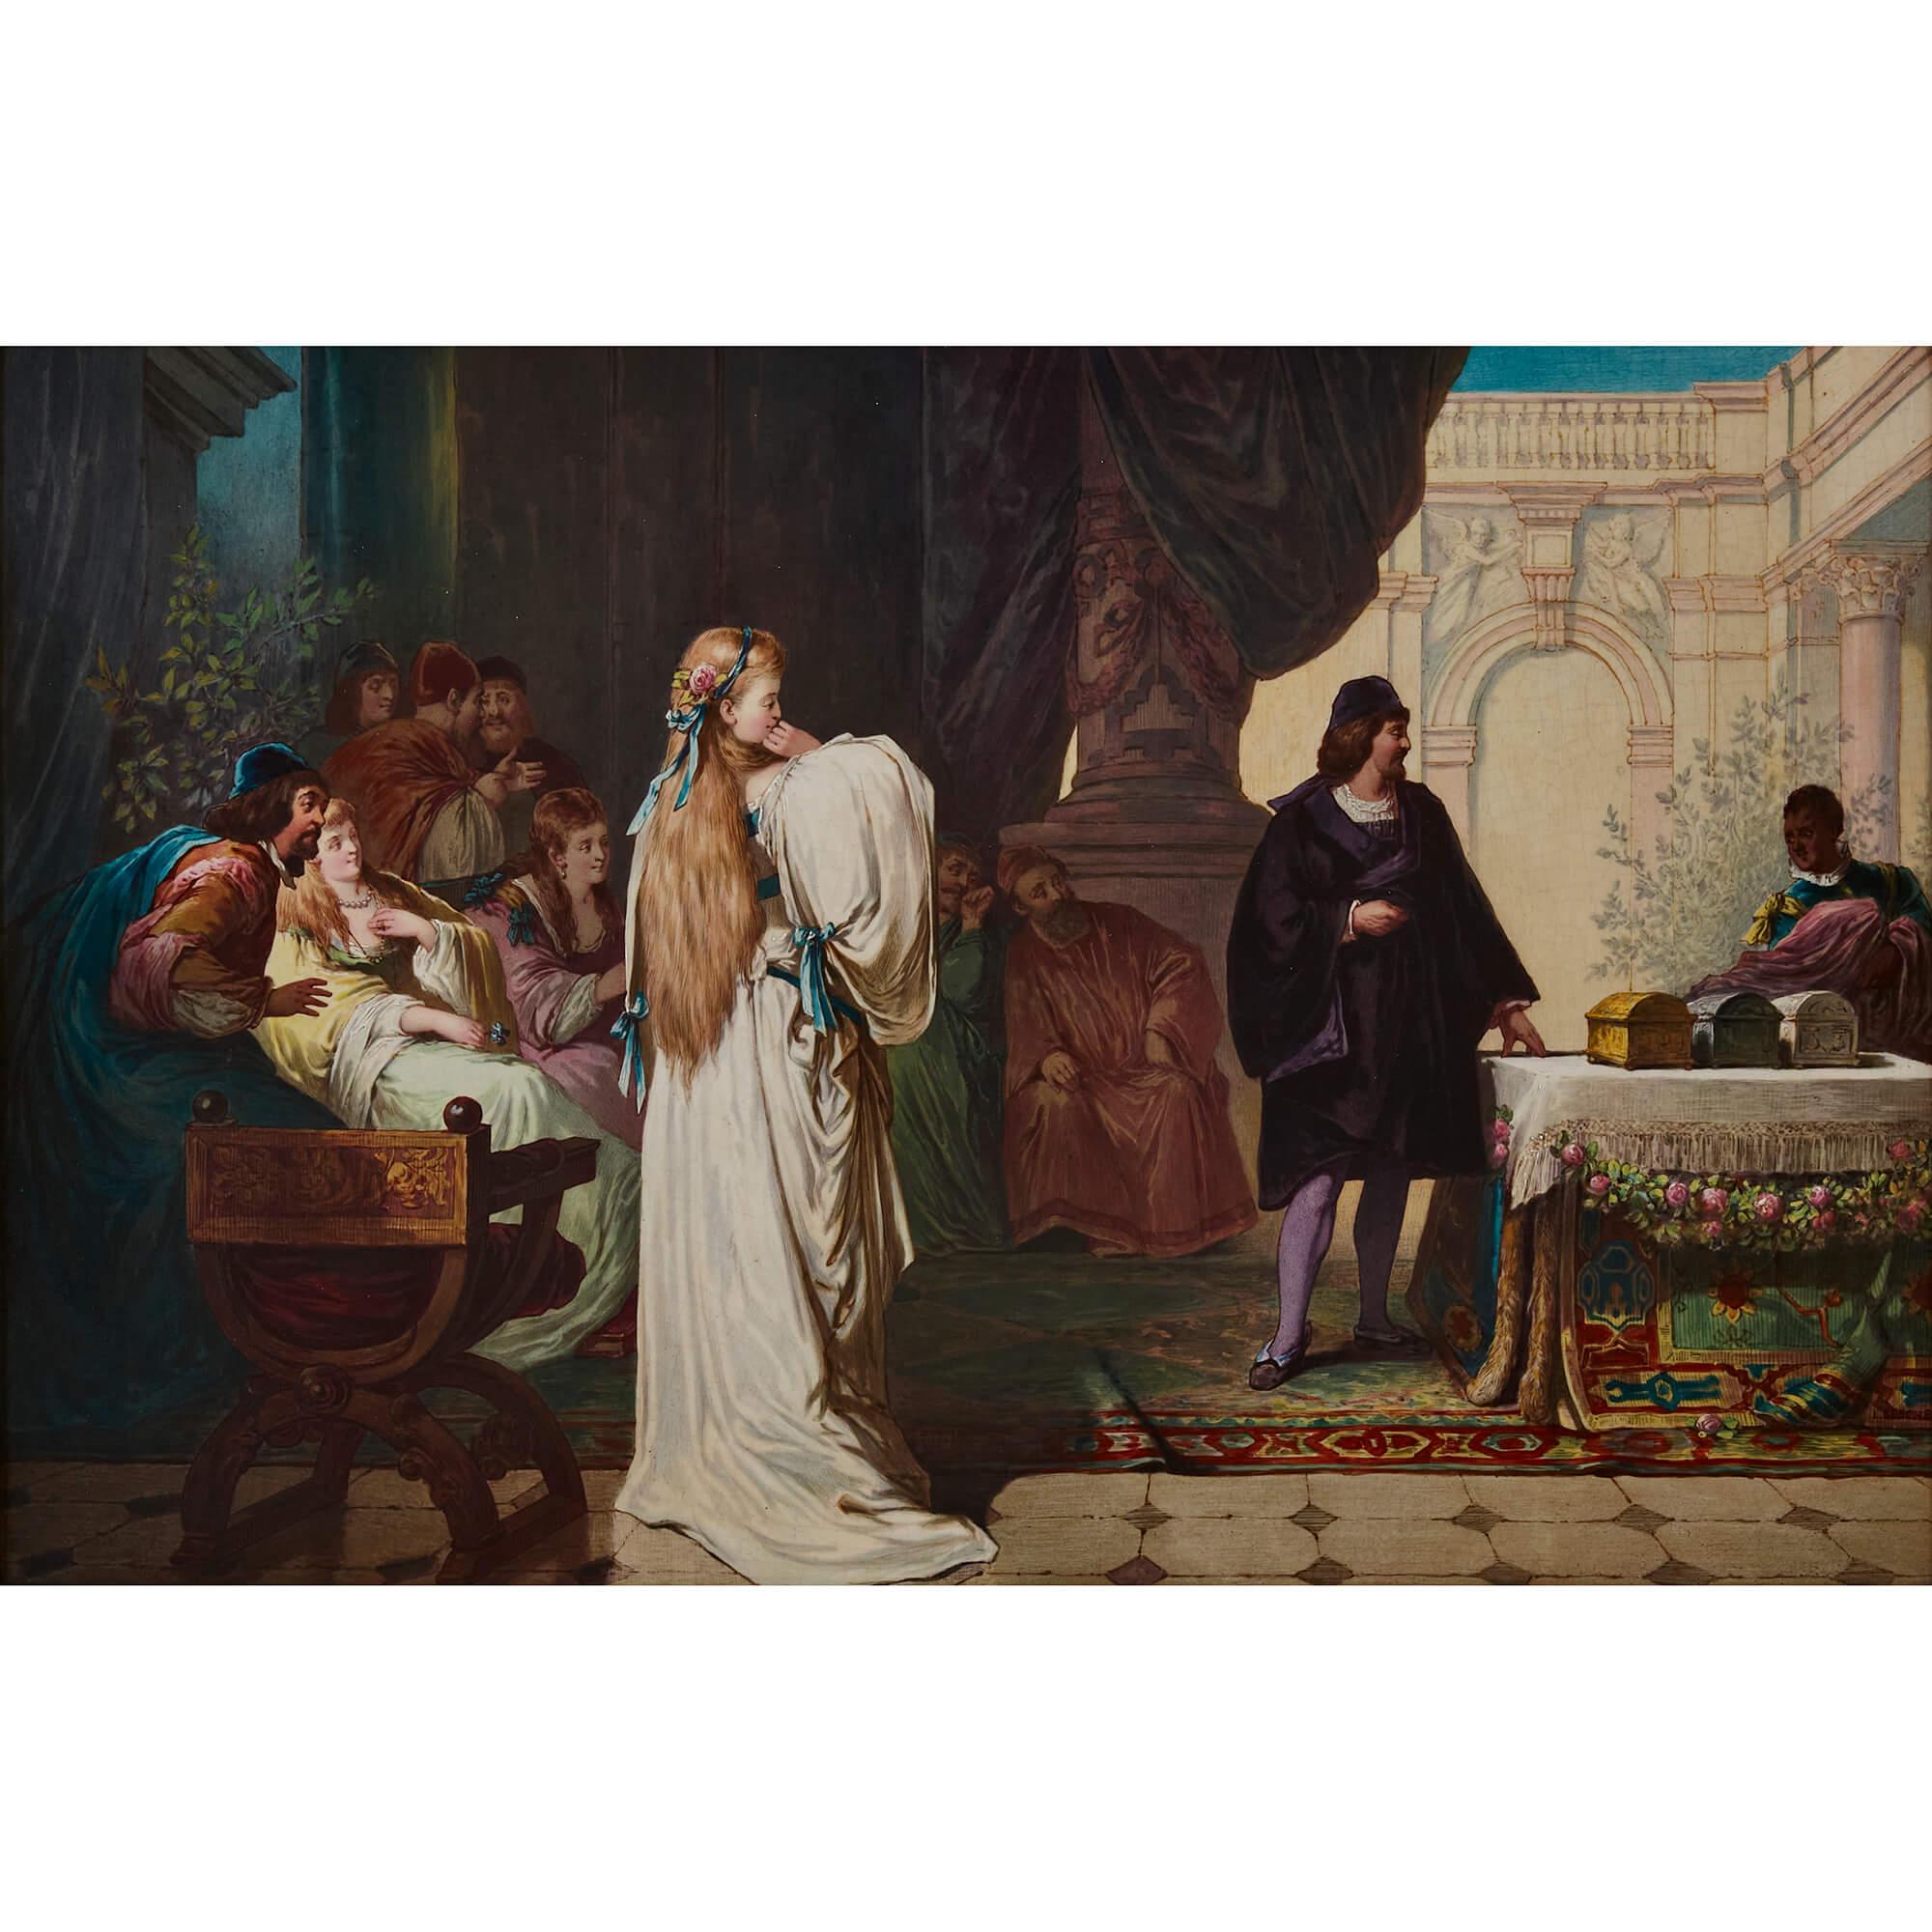 Copeland porcelain plaque depicting the Casket Scene from The Merchant of Venice
English, Late 19th Century
Frame: height 47.5cm, width 65.5cm, depth 5cm
Plaque: 34cm, width 52cm, depth 1.5cm

Executed by the excellent French porcelain artist